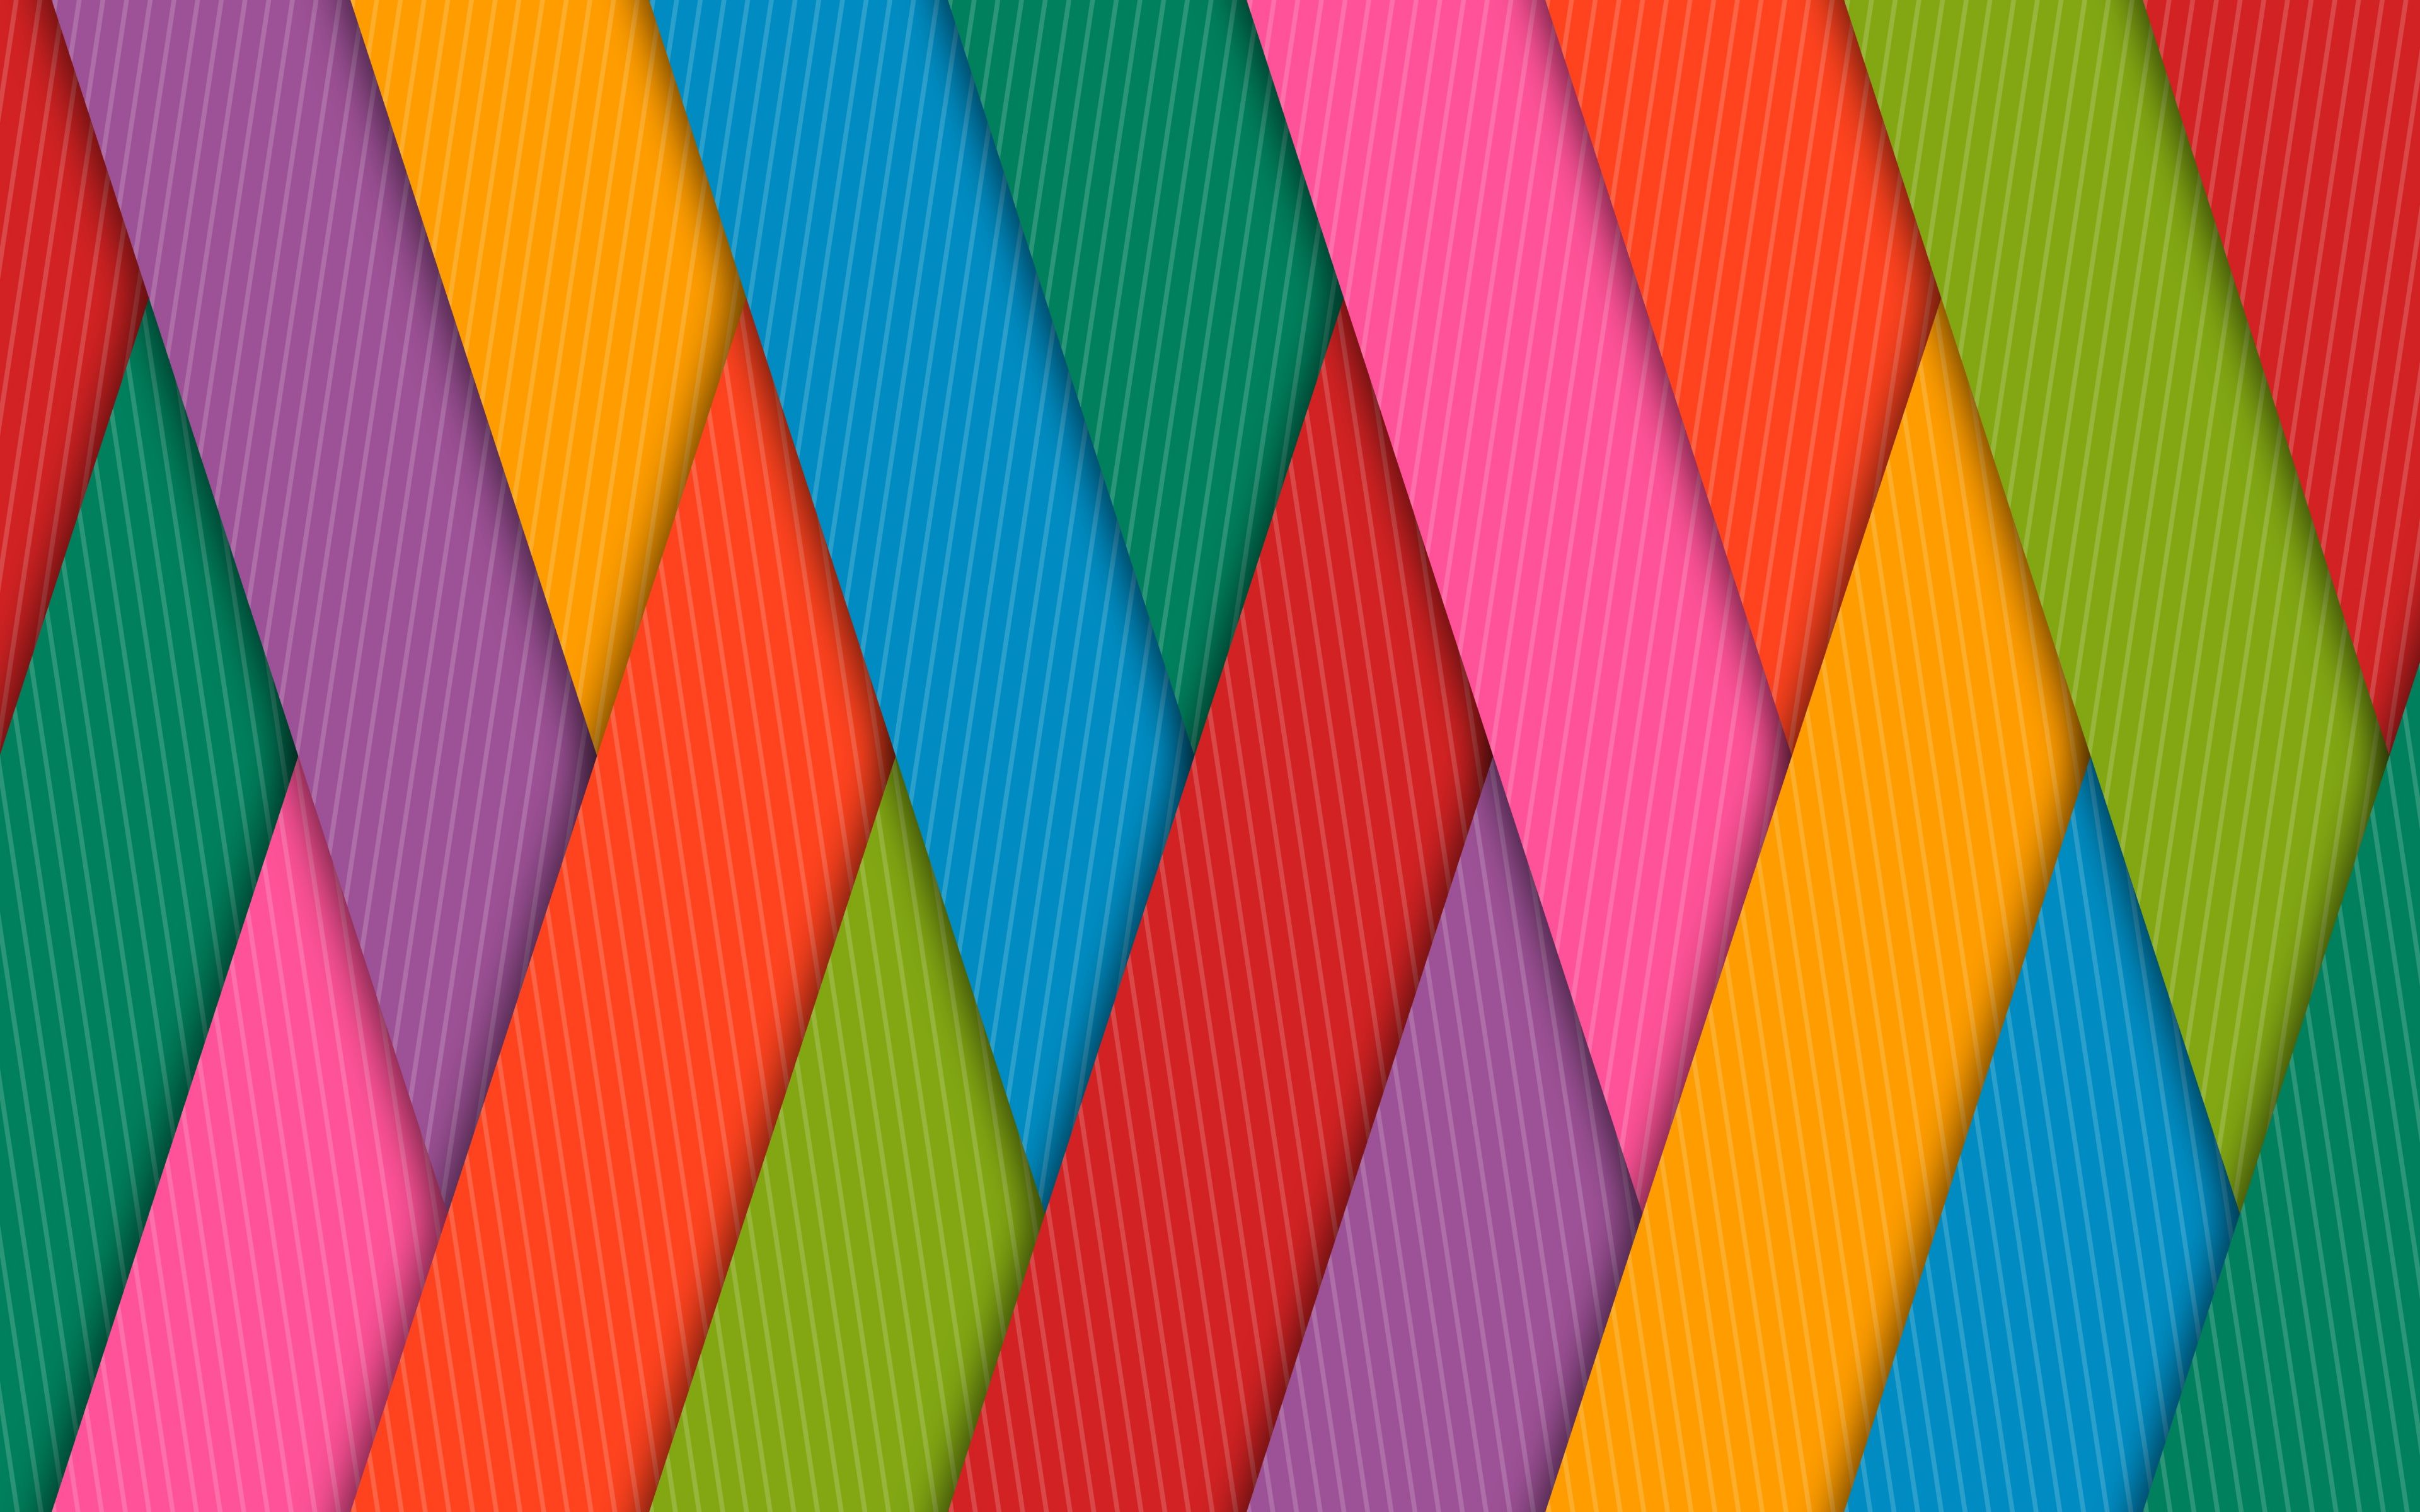 Download Crossed, stripes, material, abstract, colorful wallpaper, 3840x 4K Ultra HD 16: Widescreen